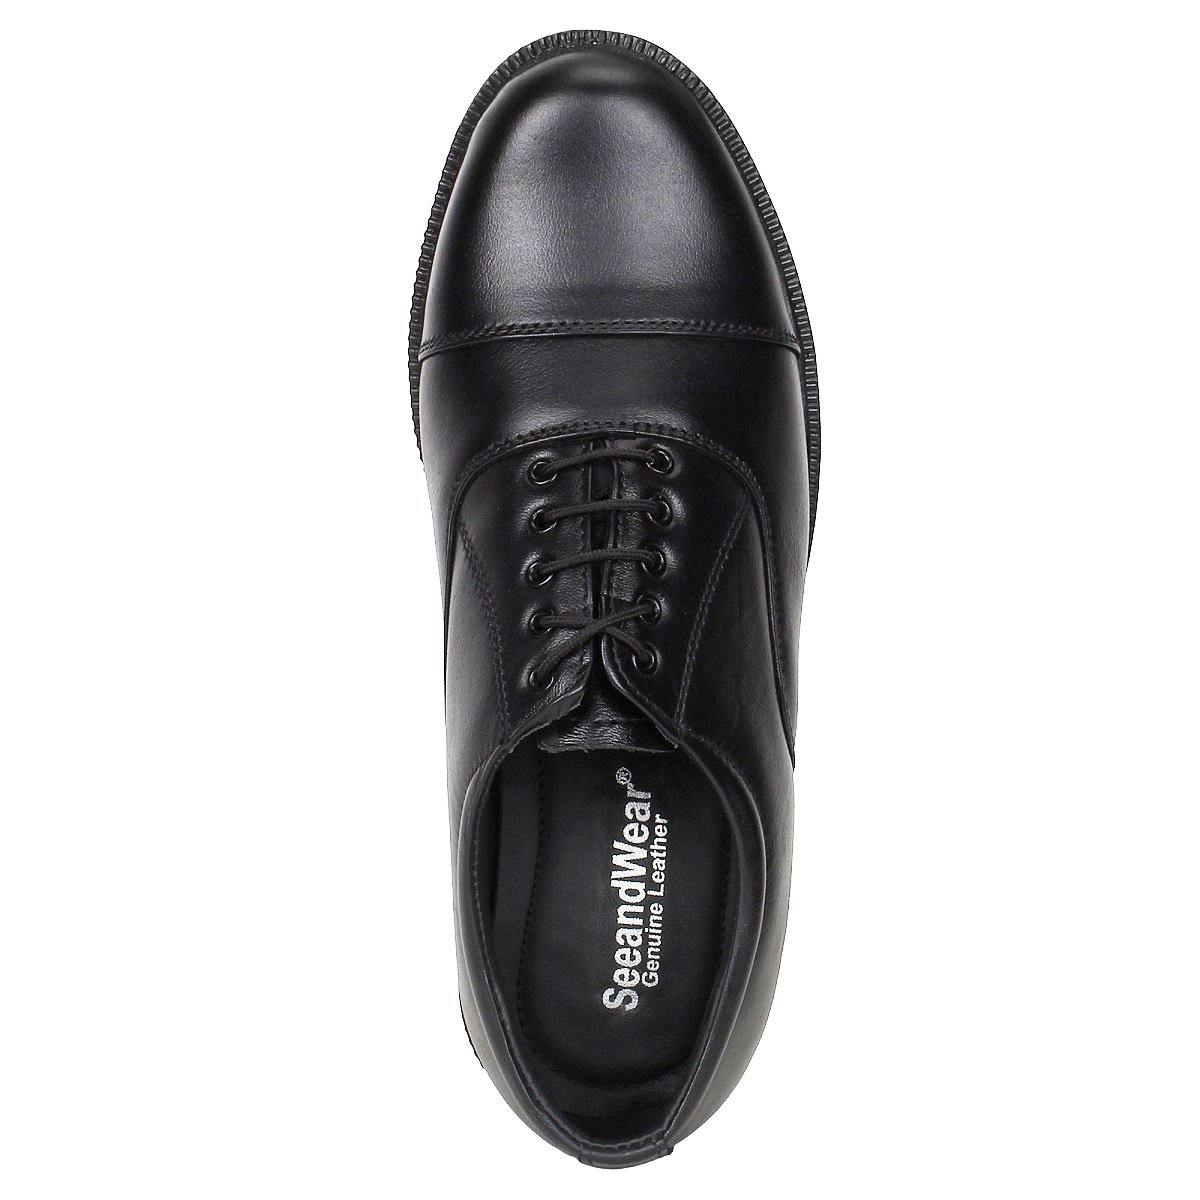 Buy Indian Police Black Shoes for Men Online in India @ SeeandWear.com